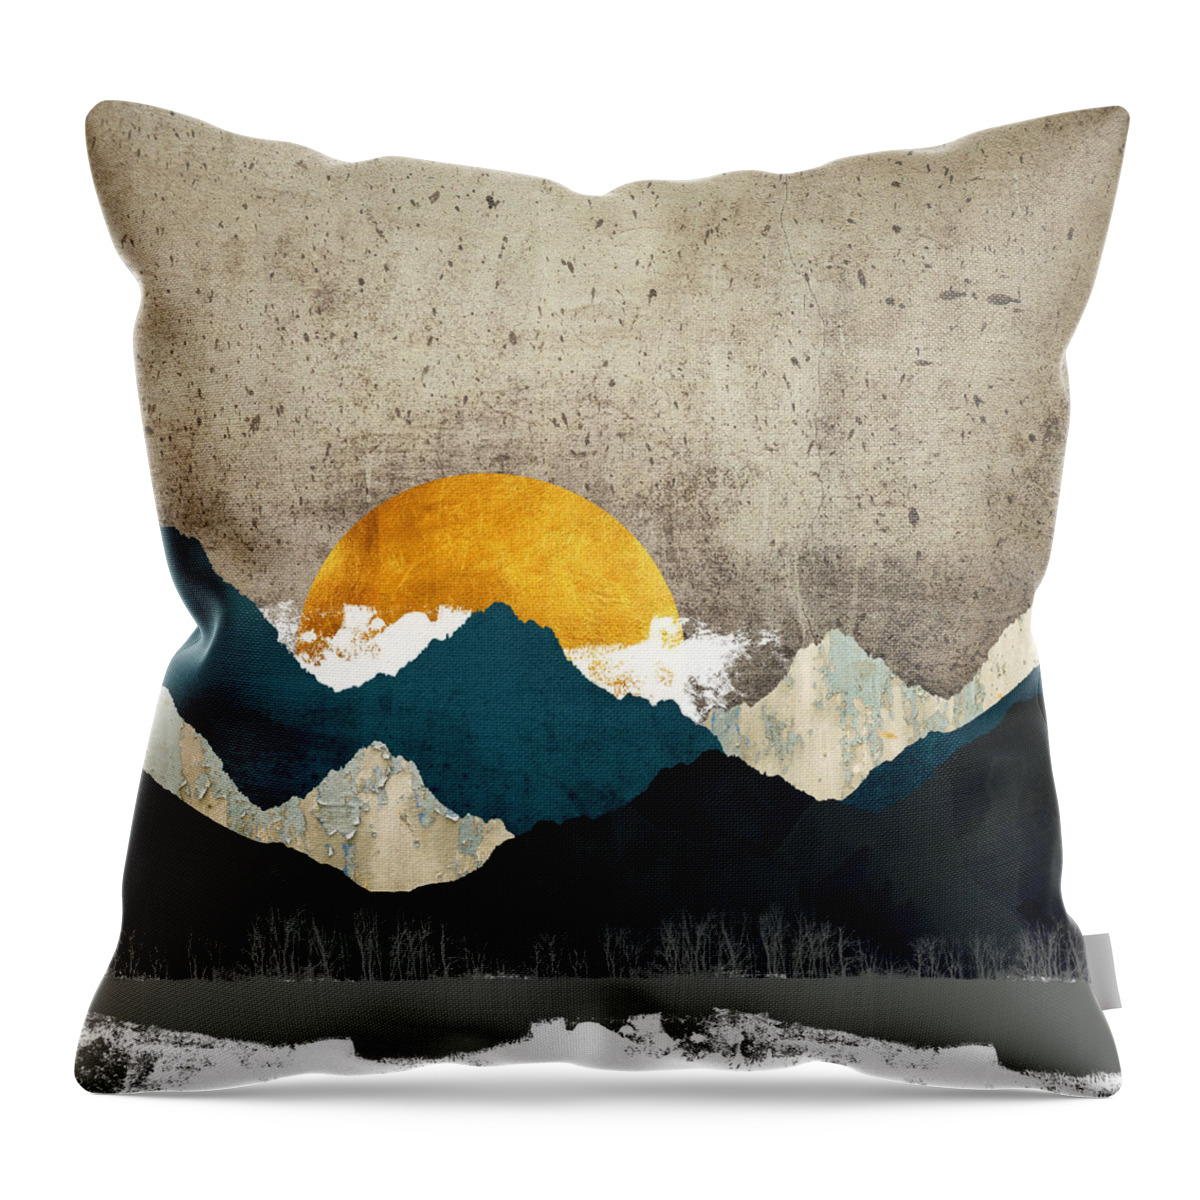 Thaw Throw Pillow featuring the digital art Thaw by Katherine Smit